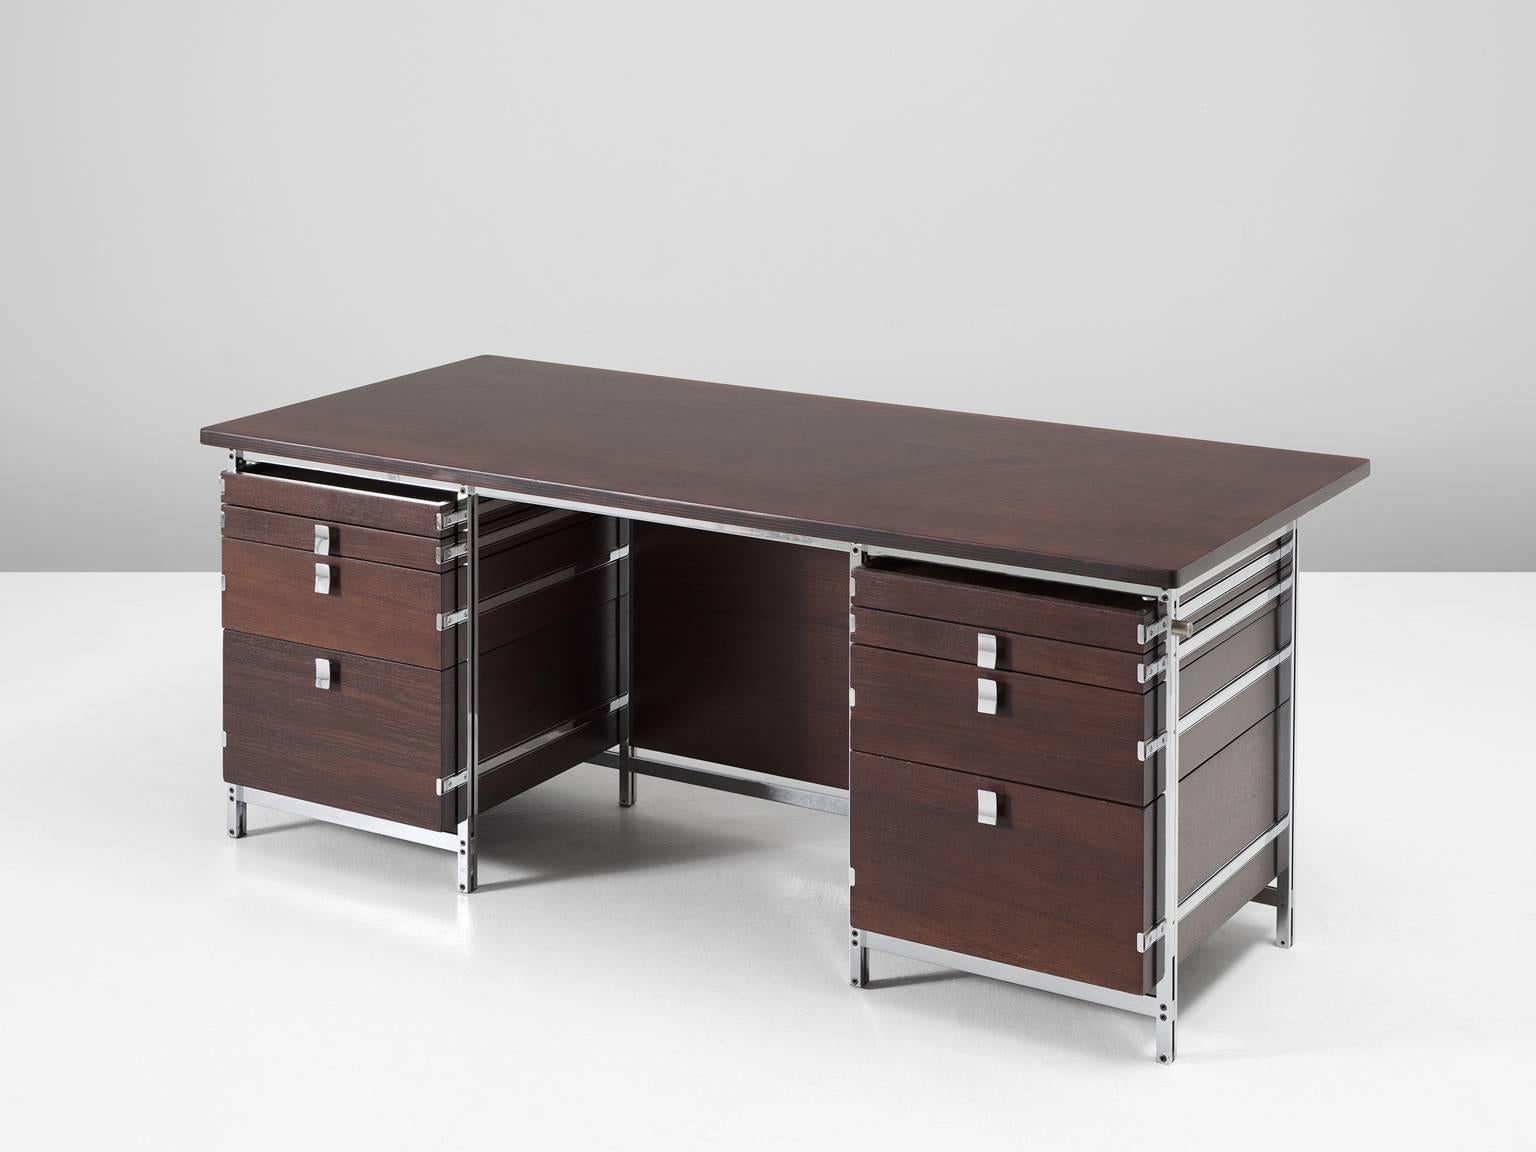 Desk, in walnut and chrome plated metal, by Jules Wabbes for Mobilier Universel, Belgium, 1960s. 

Very rare but beautiful designed desk by one of Belgium's most renowned designers Jules Wabbes. His experimental ways of approaching wood and